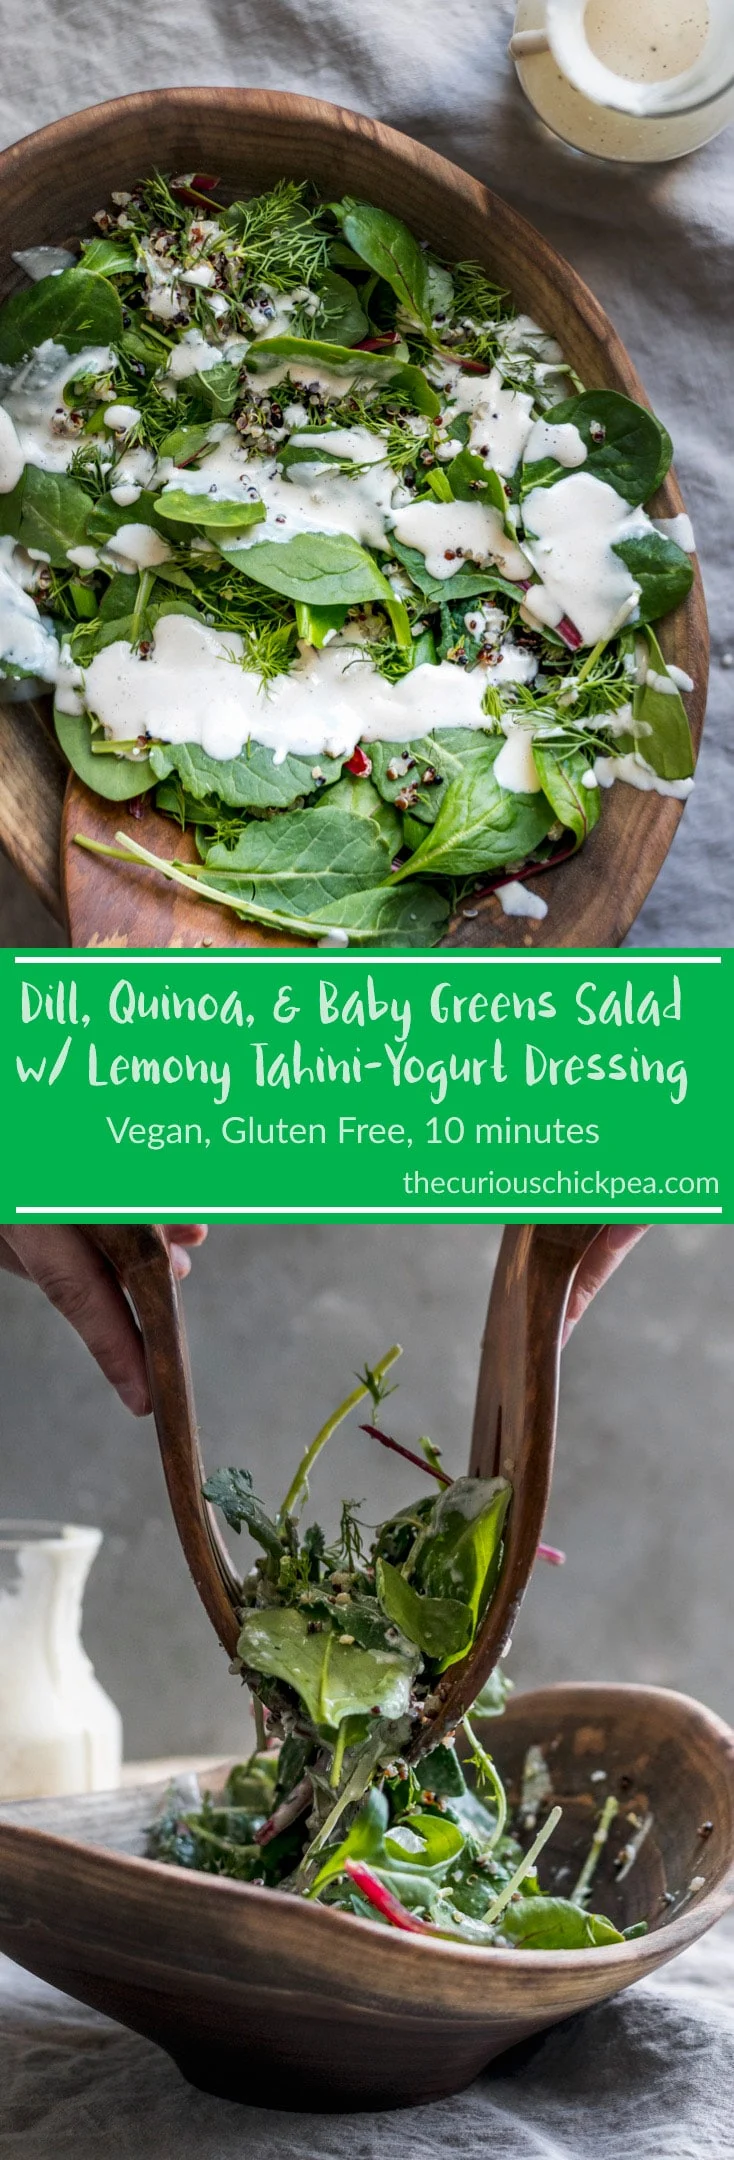 Dill, Quinoa, and Baby Greens Salad with Creamy Lemon Tahini-Yogurt Dressing | vegan, gluten free, ready in 10 minutes. This salad makes for a delicious light meal or the perfect side salad. | thecuriouschickpea.com #vegan #recipe